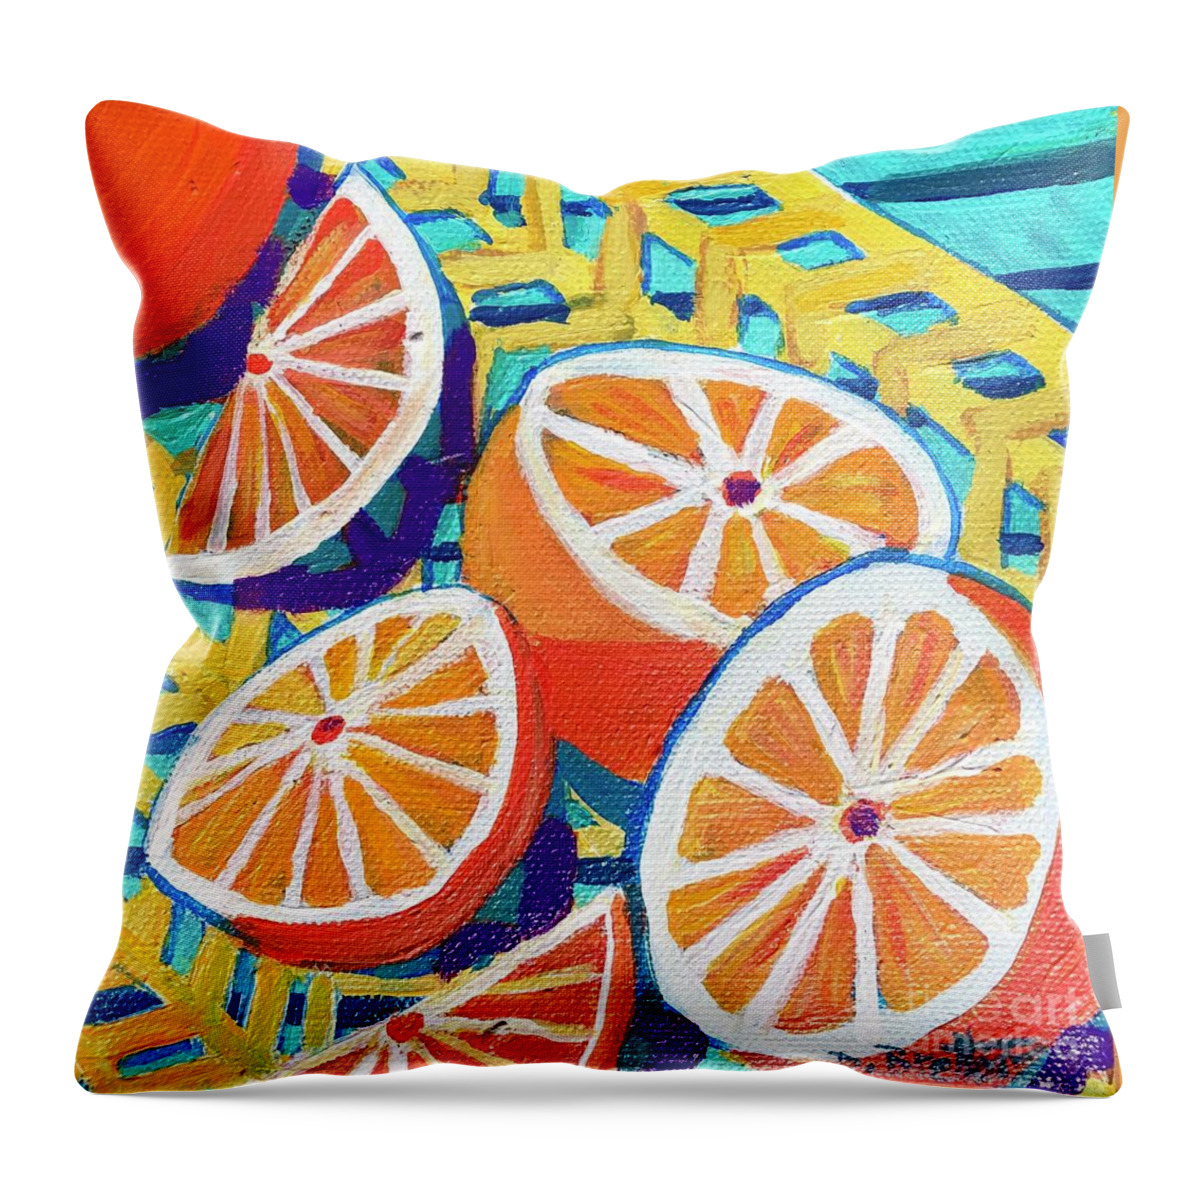 Oranges Throw Pillow featuring the painting Sun Kissed Oranges by Debra Bretton Robinson